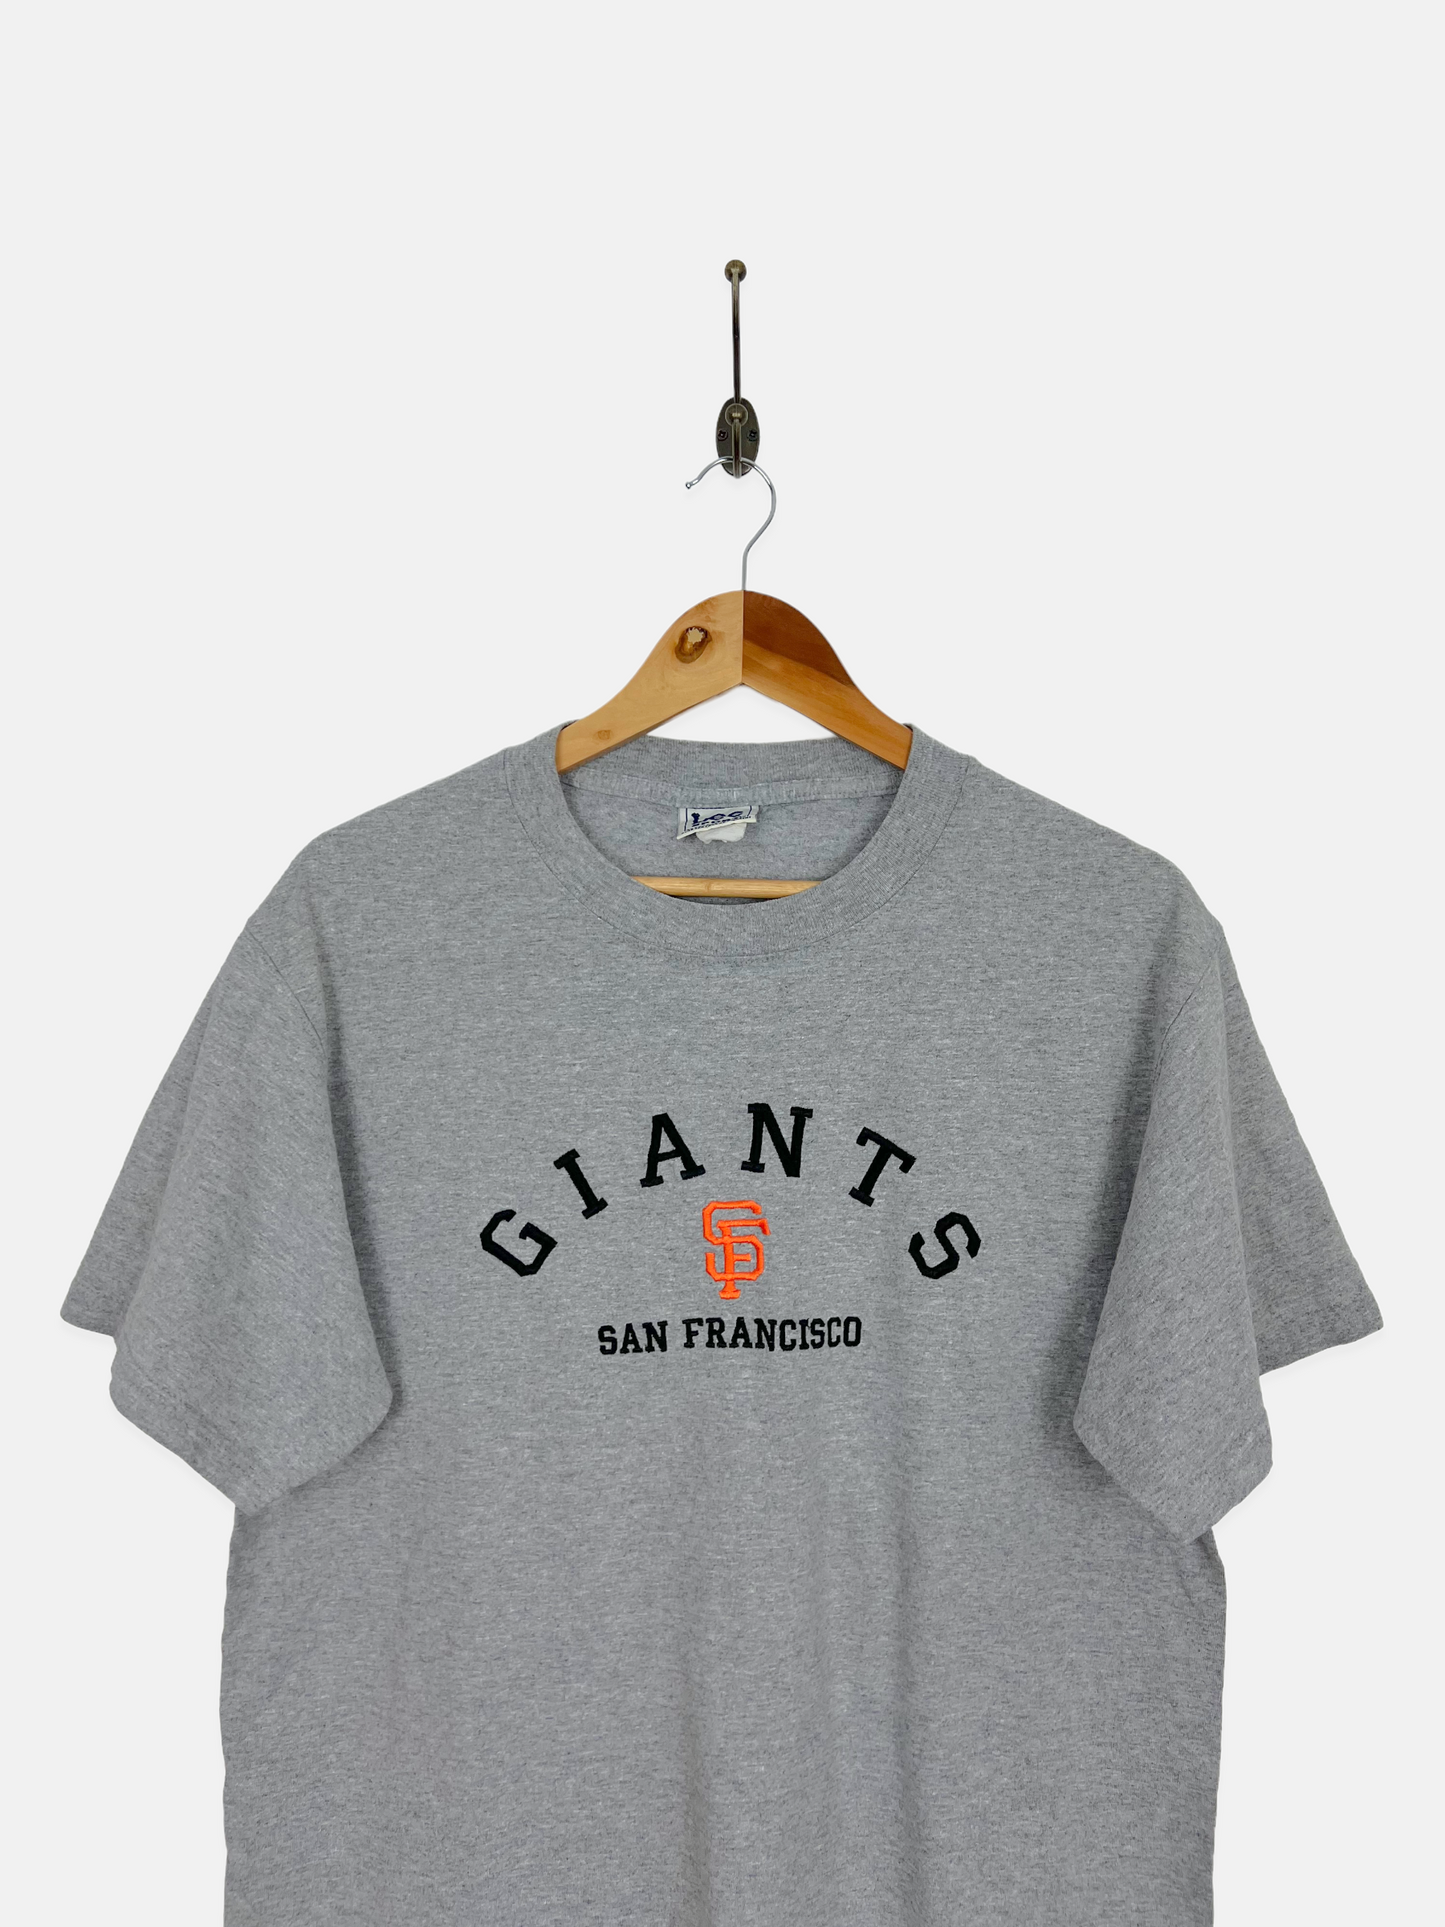 90's San Francisco Giants MLB Embroidered Vintage T-Shirt Size 12